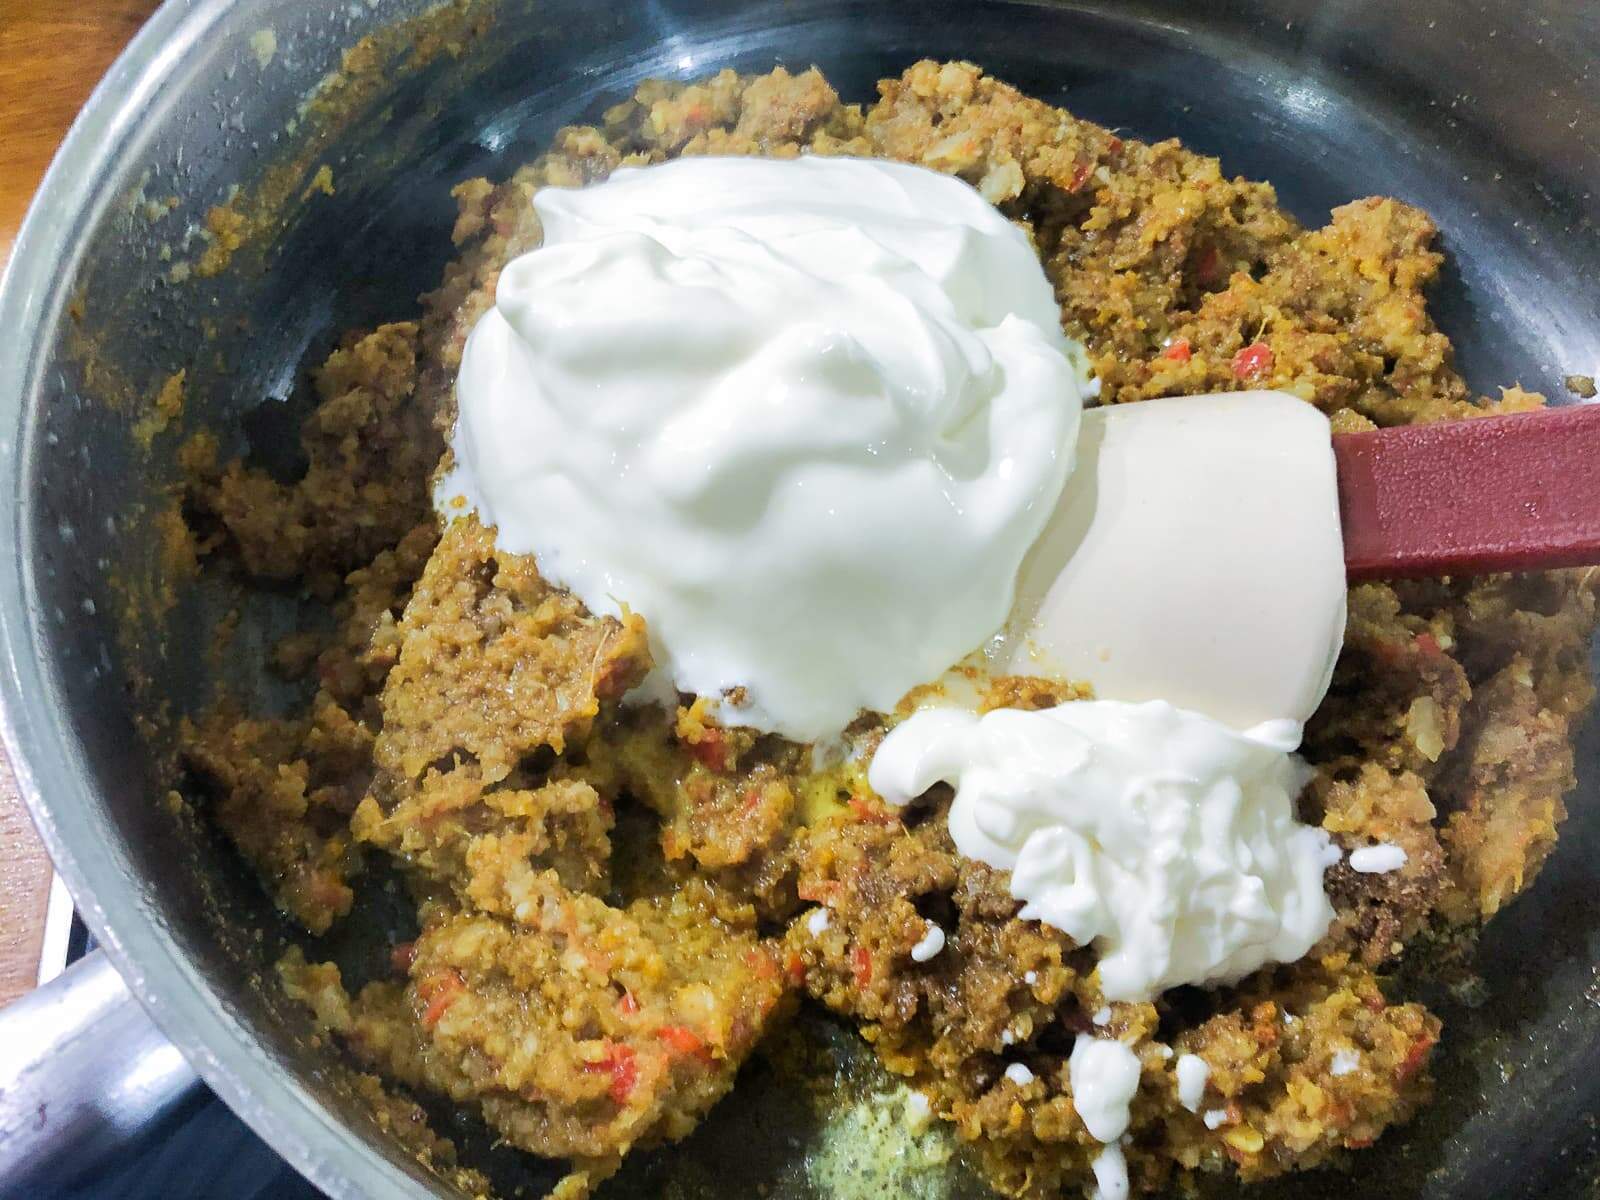 Yogurt being added to a curry spice paste in a frying pan.